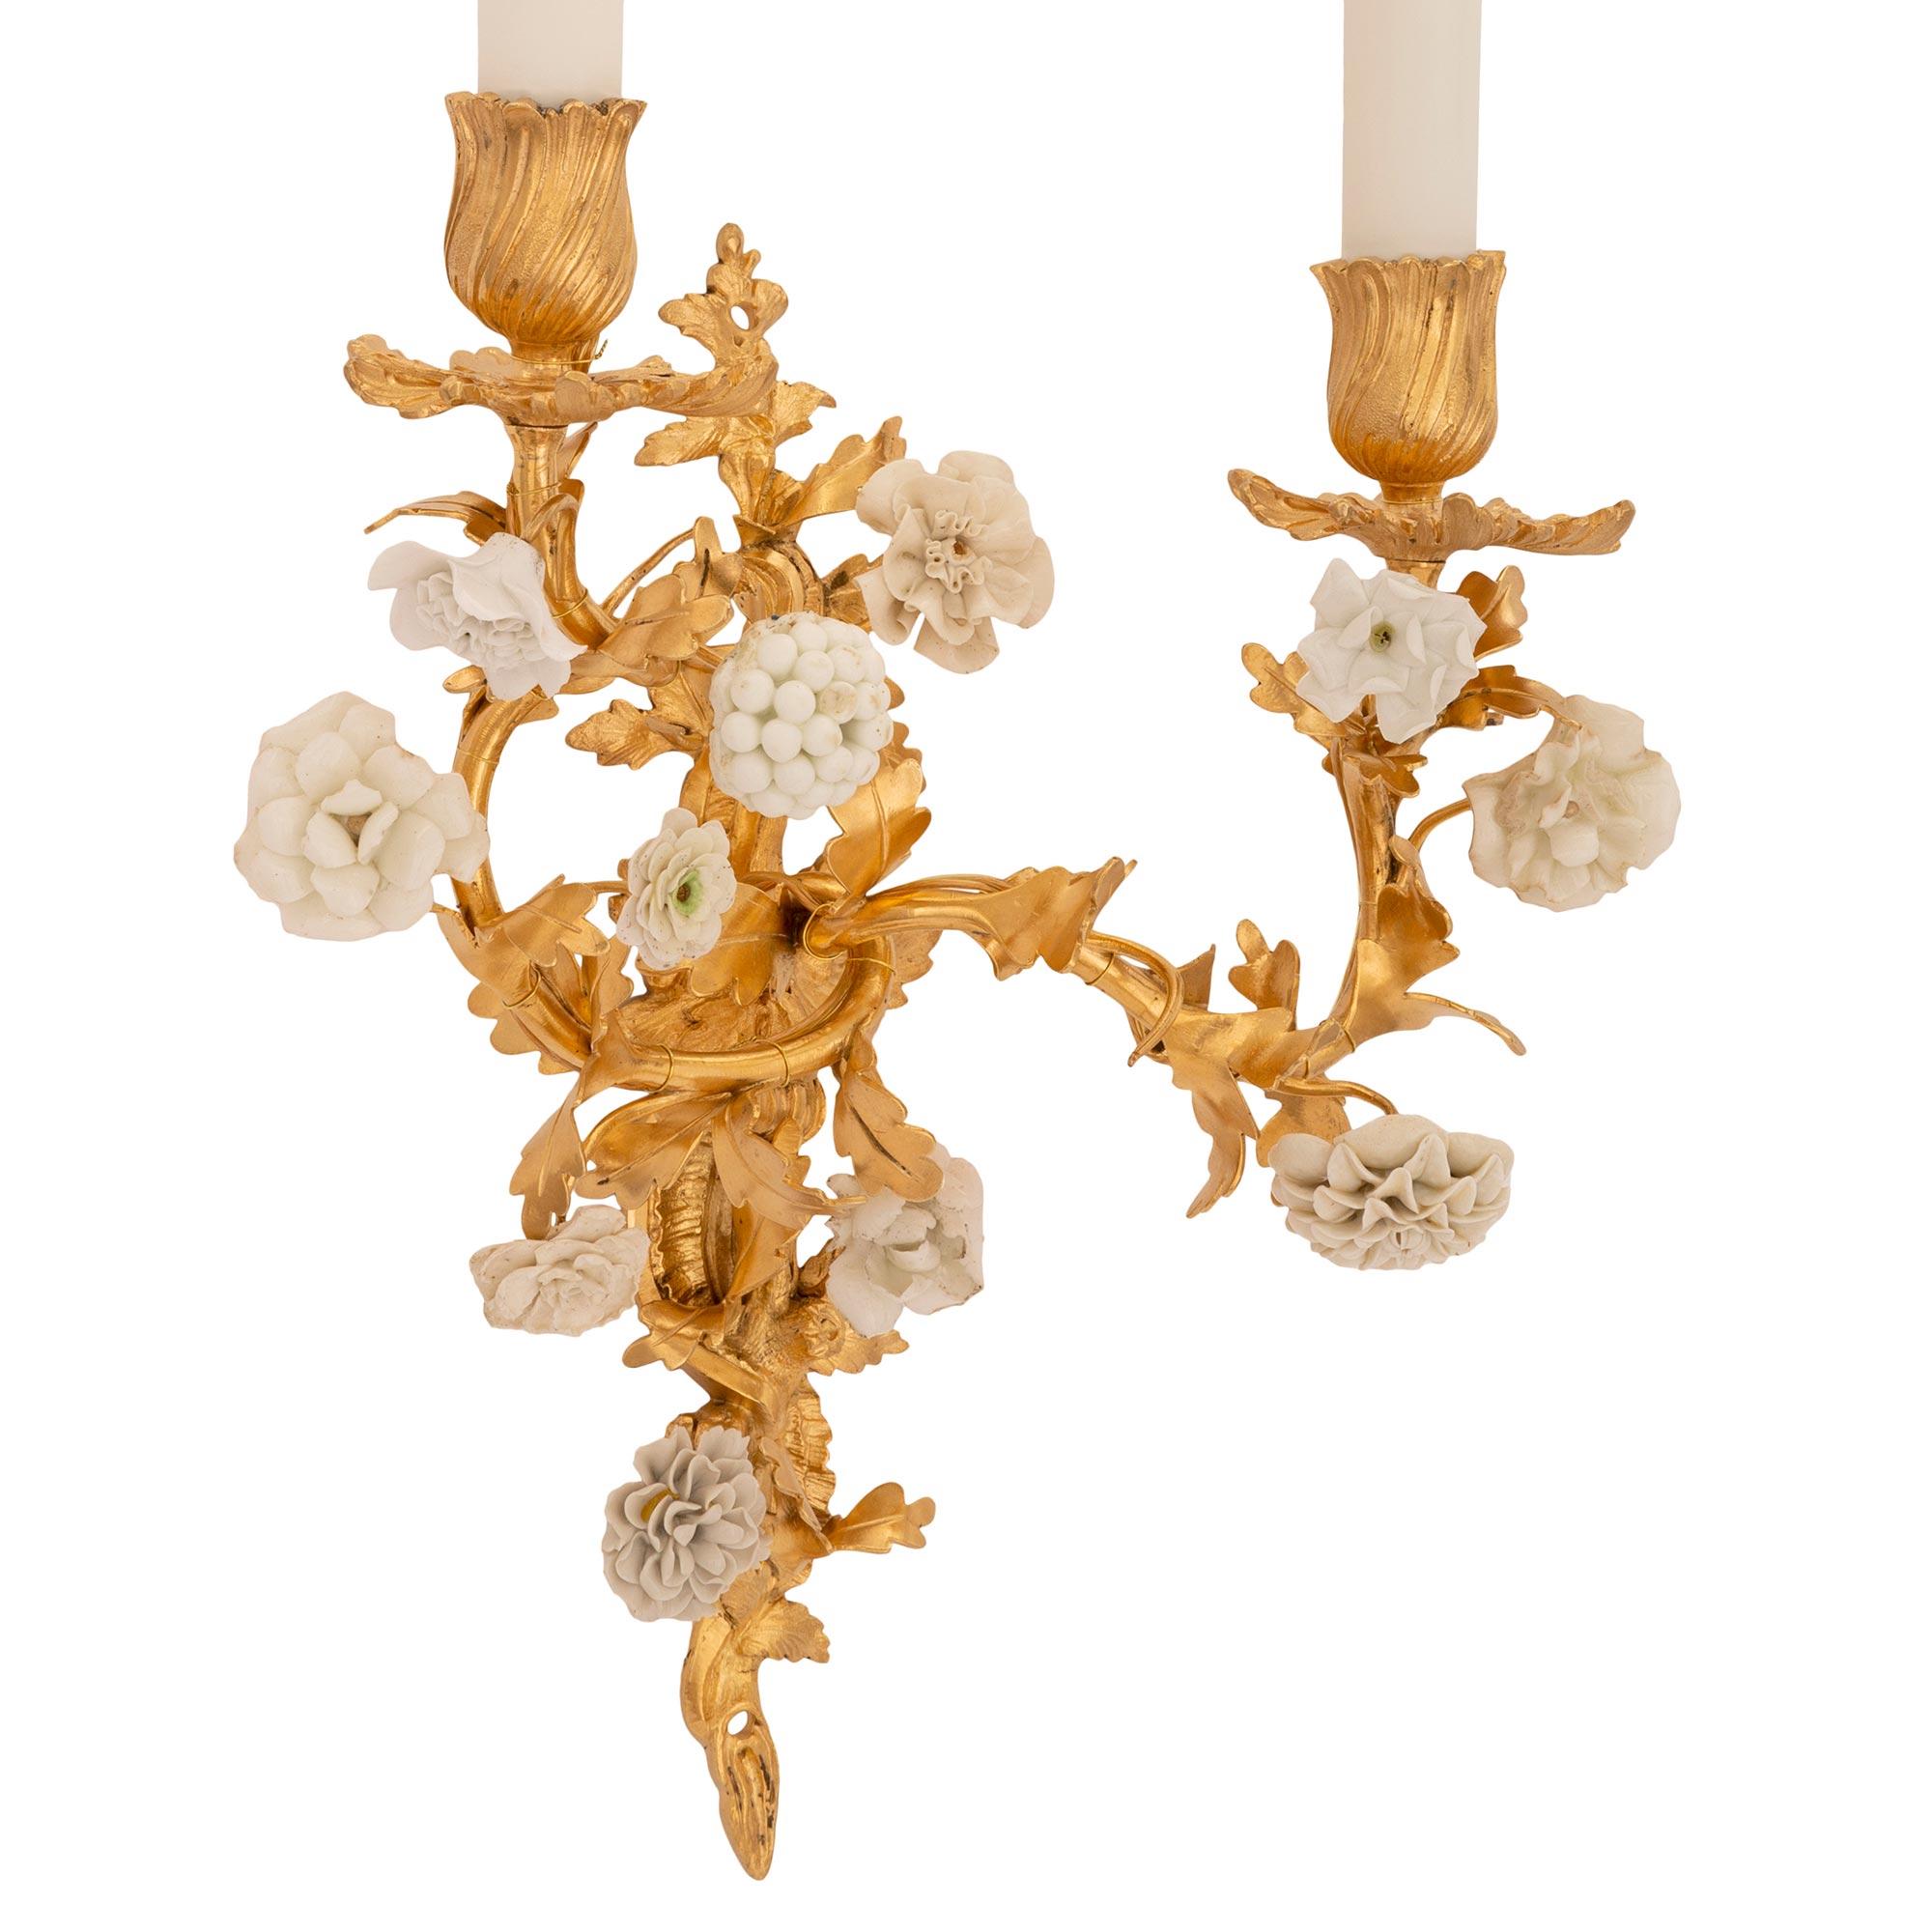 A charming and most decorative true pair of French 19th century Louis XV st. ormolu and porcelain sconces. Each two arm Blanc de Chine sconce is centered by a superb intricately detailed scrolled foliate backplate in a striking satin and burnished